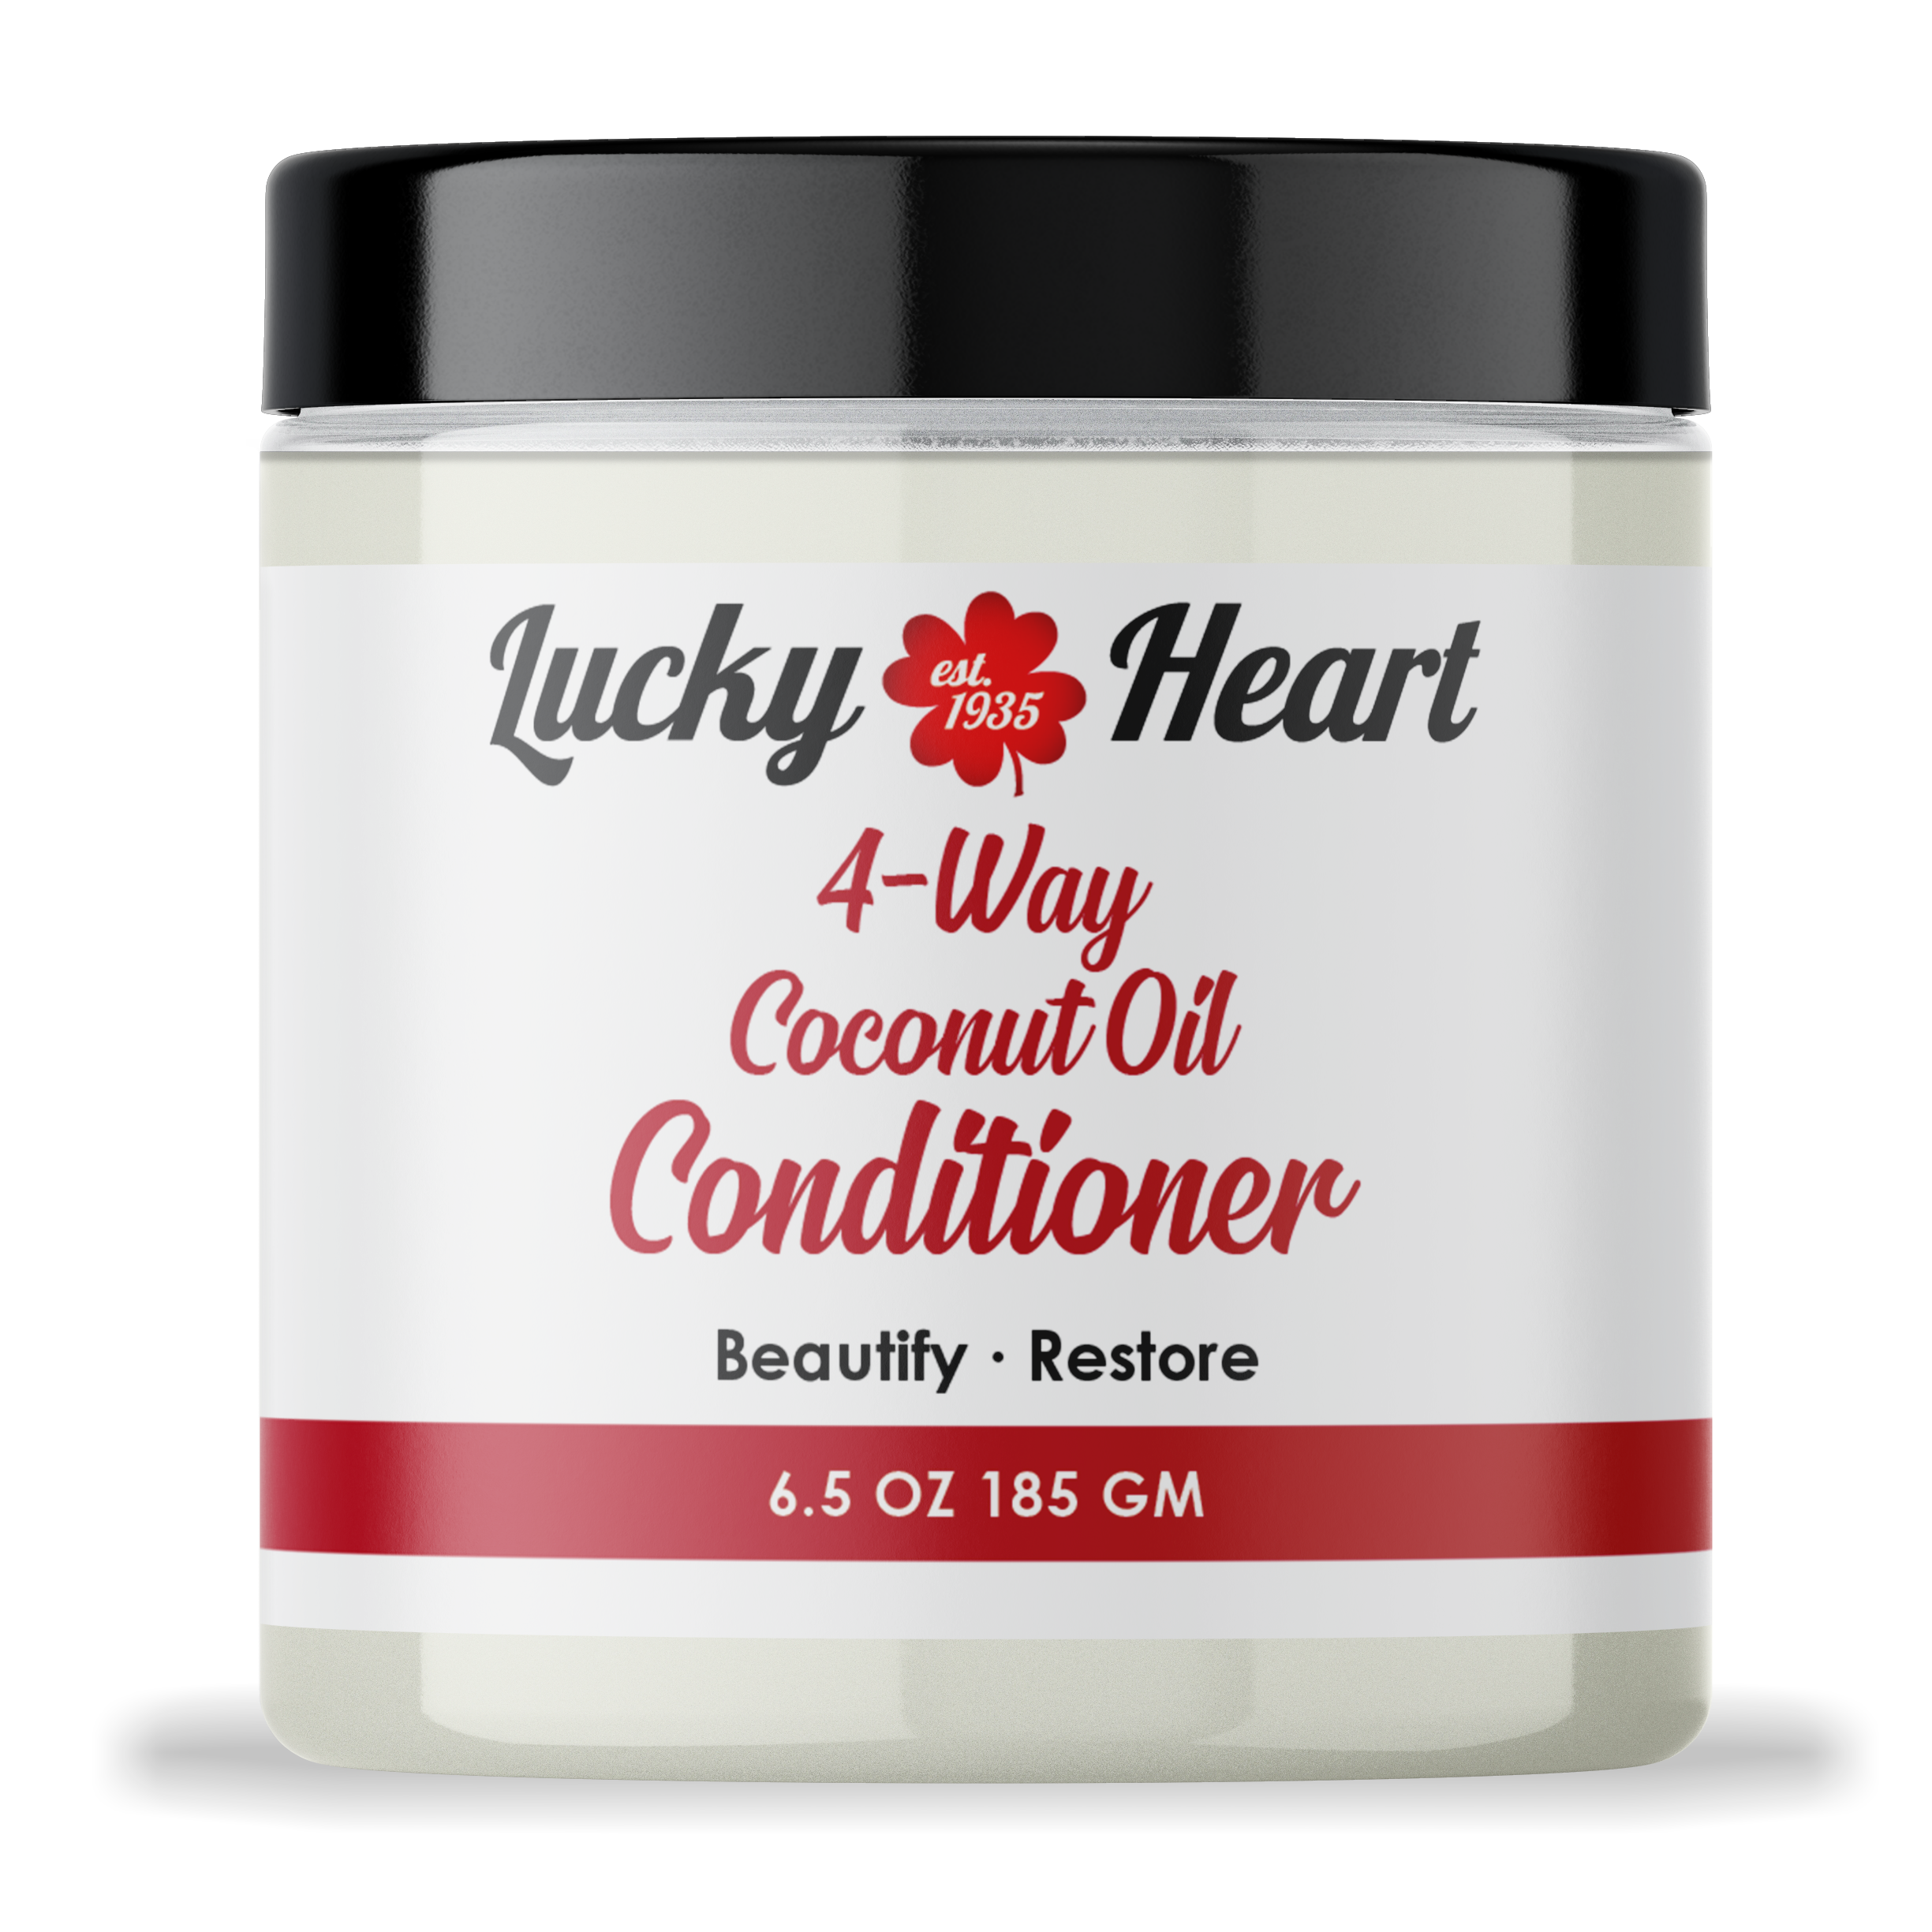 Coconut Oil Conditioner for healthy, sleek, hydrated hair from Lucky Heart Cosmetics